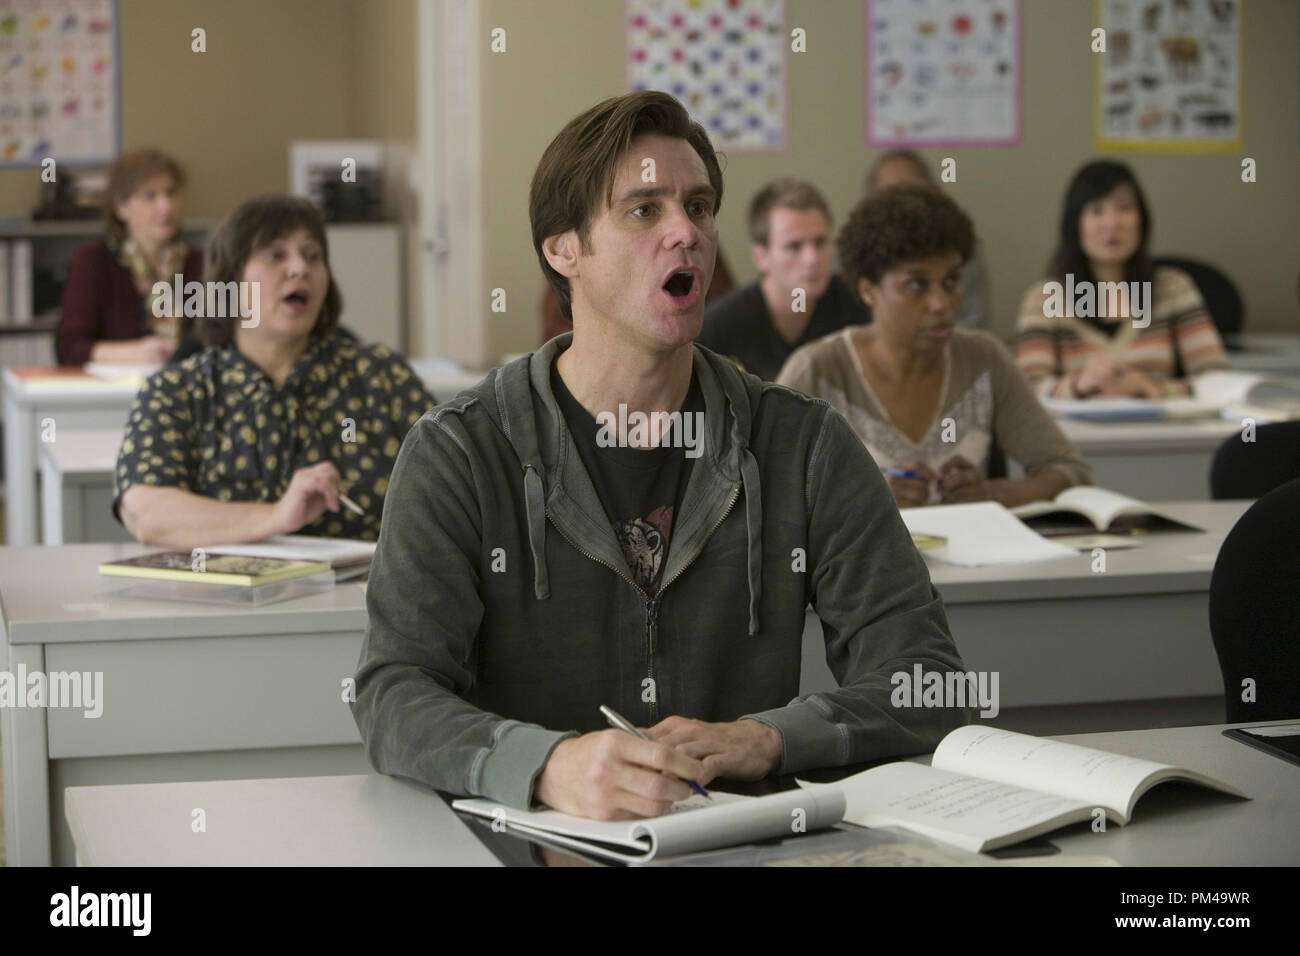 Carl (JIM CARREY) takes notes as he learns Korean in Warner Bros. Pictures' and Village Roadshow's comedy 'Yes Man,' distributed by Warner Bros. Pictures. Stock Photo